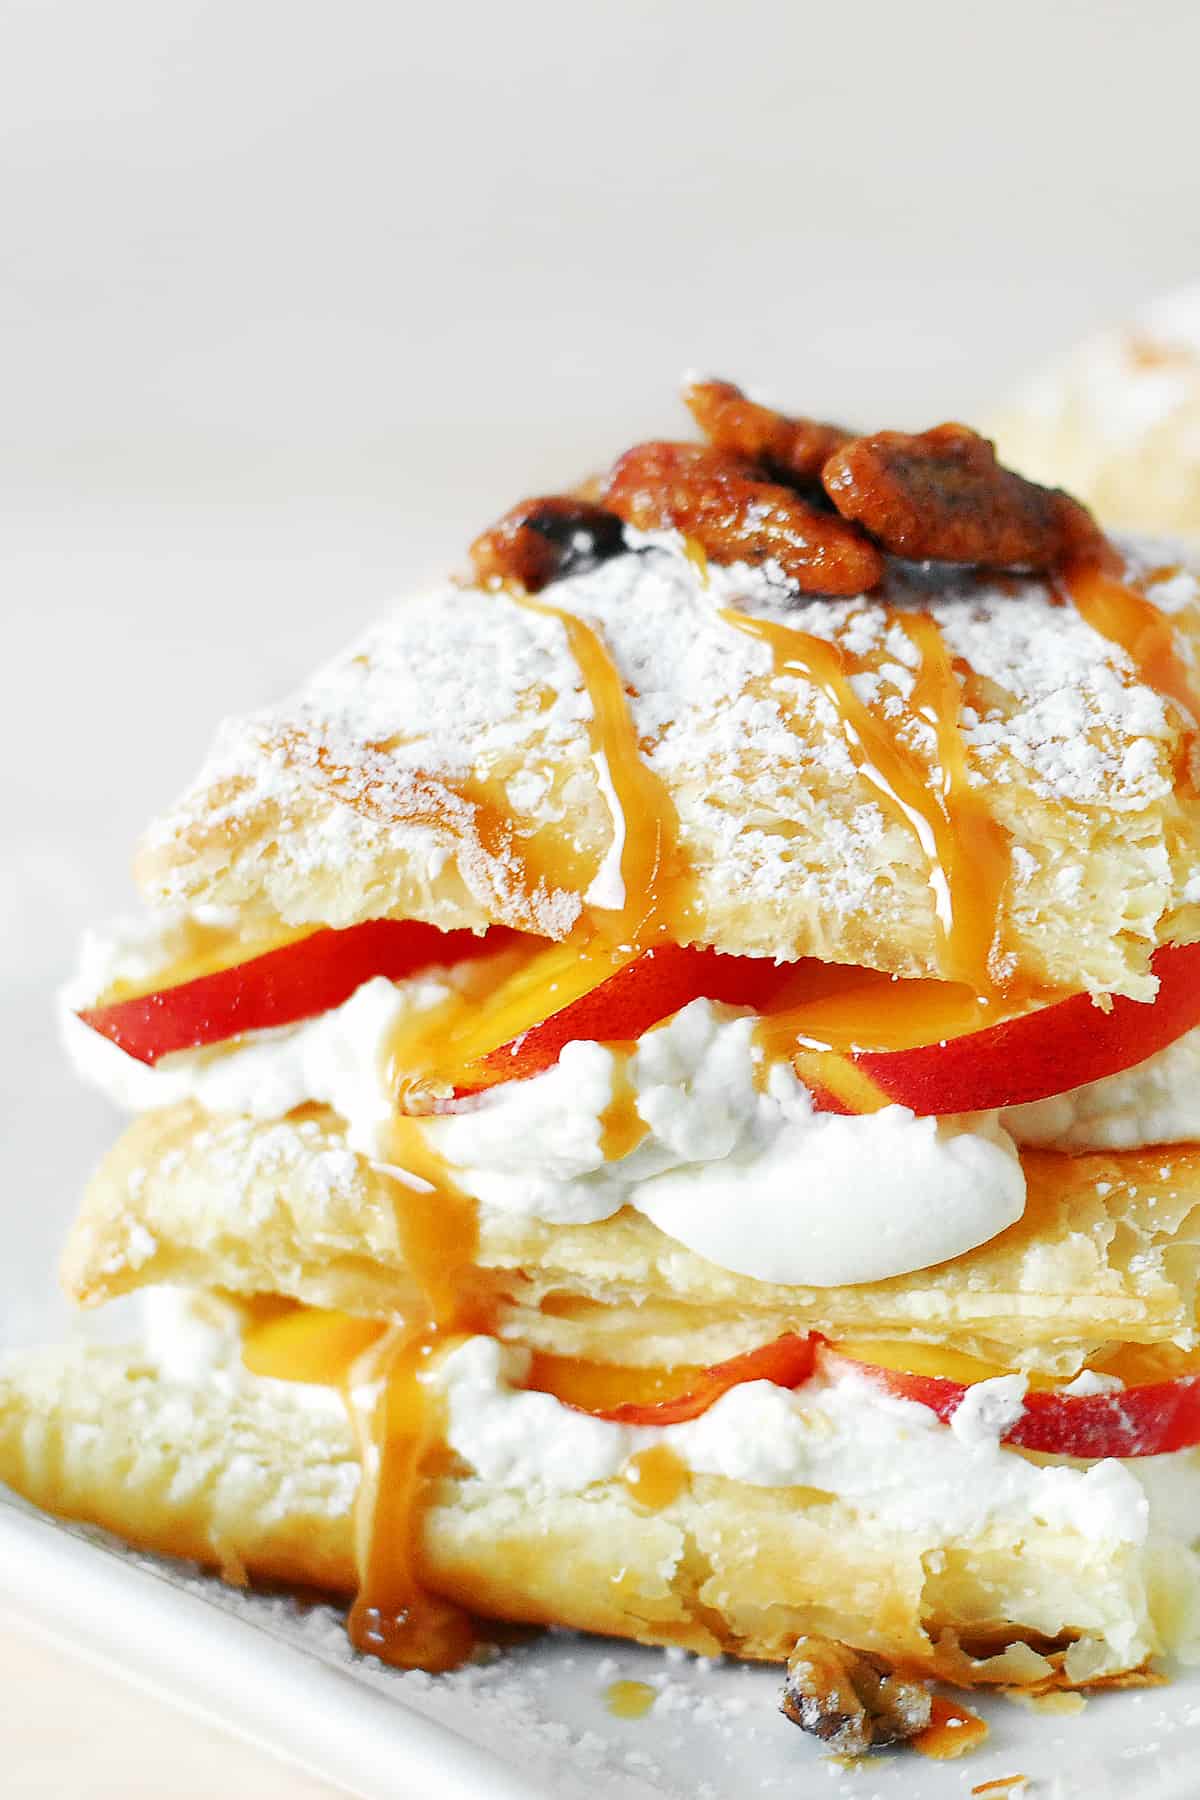 Napoleon pastry with cream and sliced peaches.